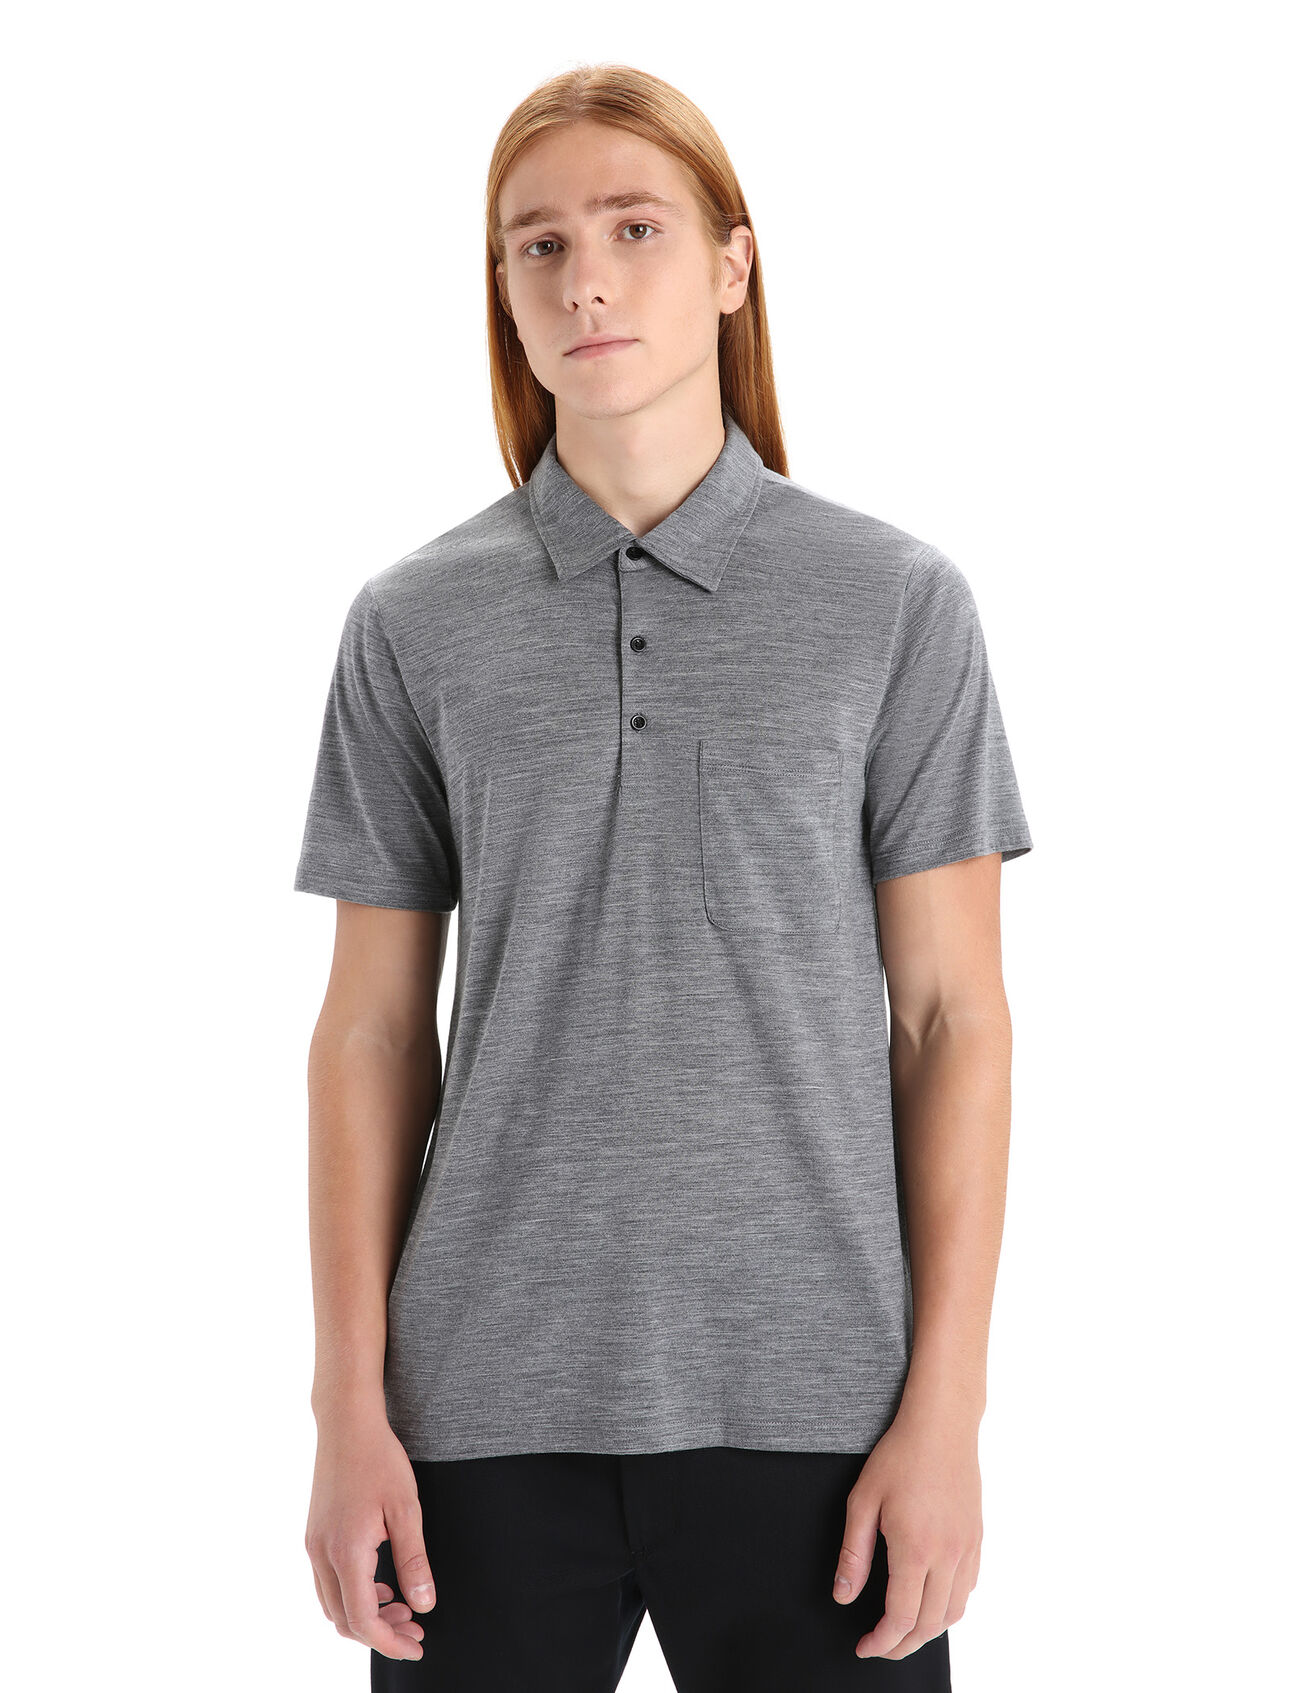 Mens Merino Drayden Short Sleeve Polo A classic, stylish polo with everyday versatility and incredible breathability, the Drayden Short Sleeve Polo features our moisture-wicking Cool-Lite™merino jersey fabric.